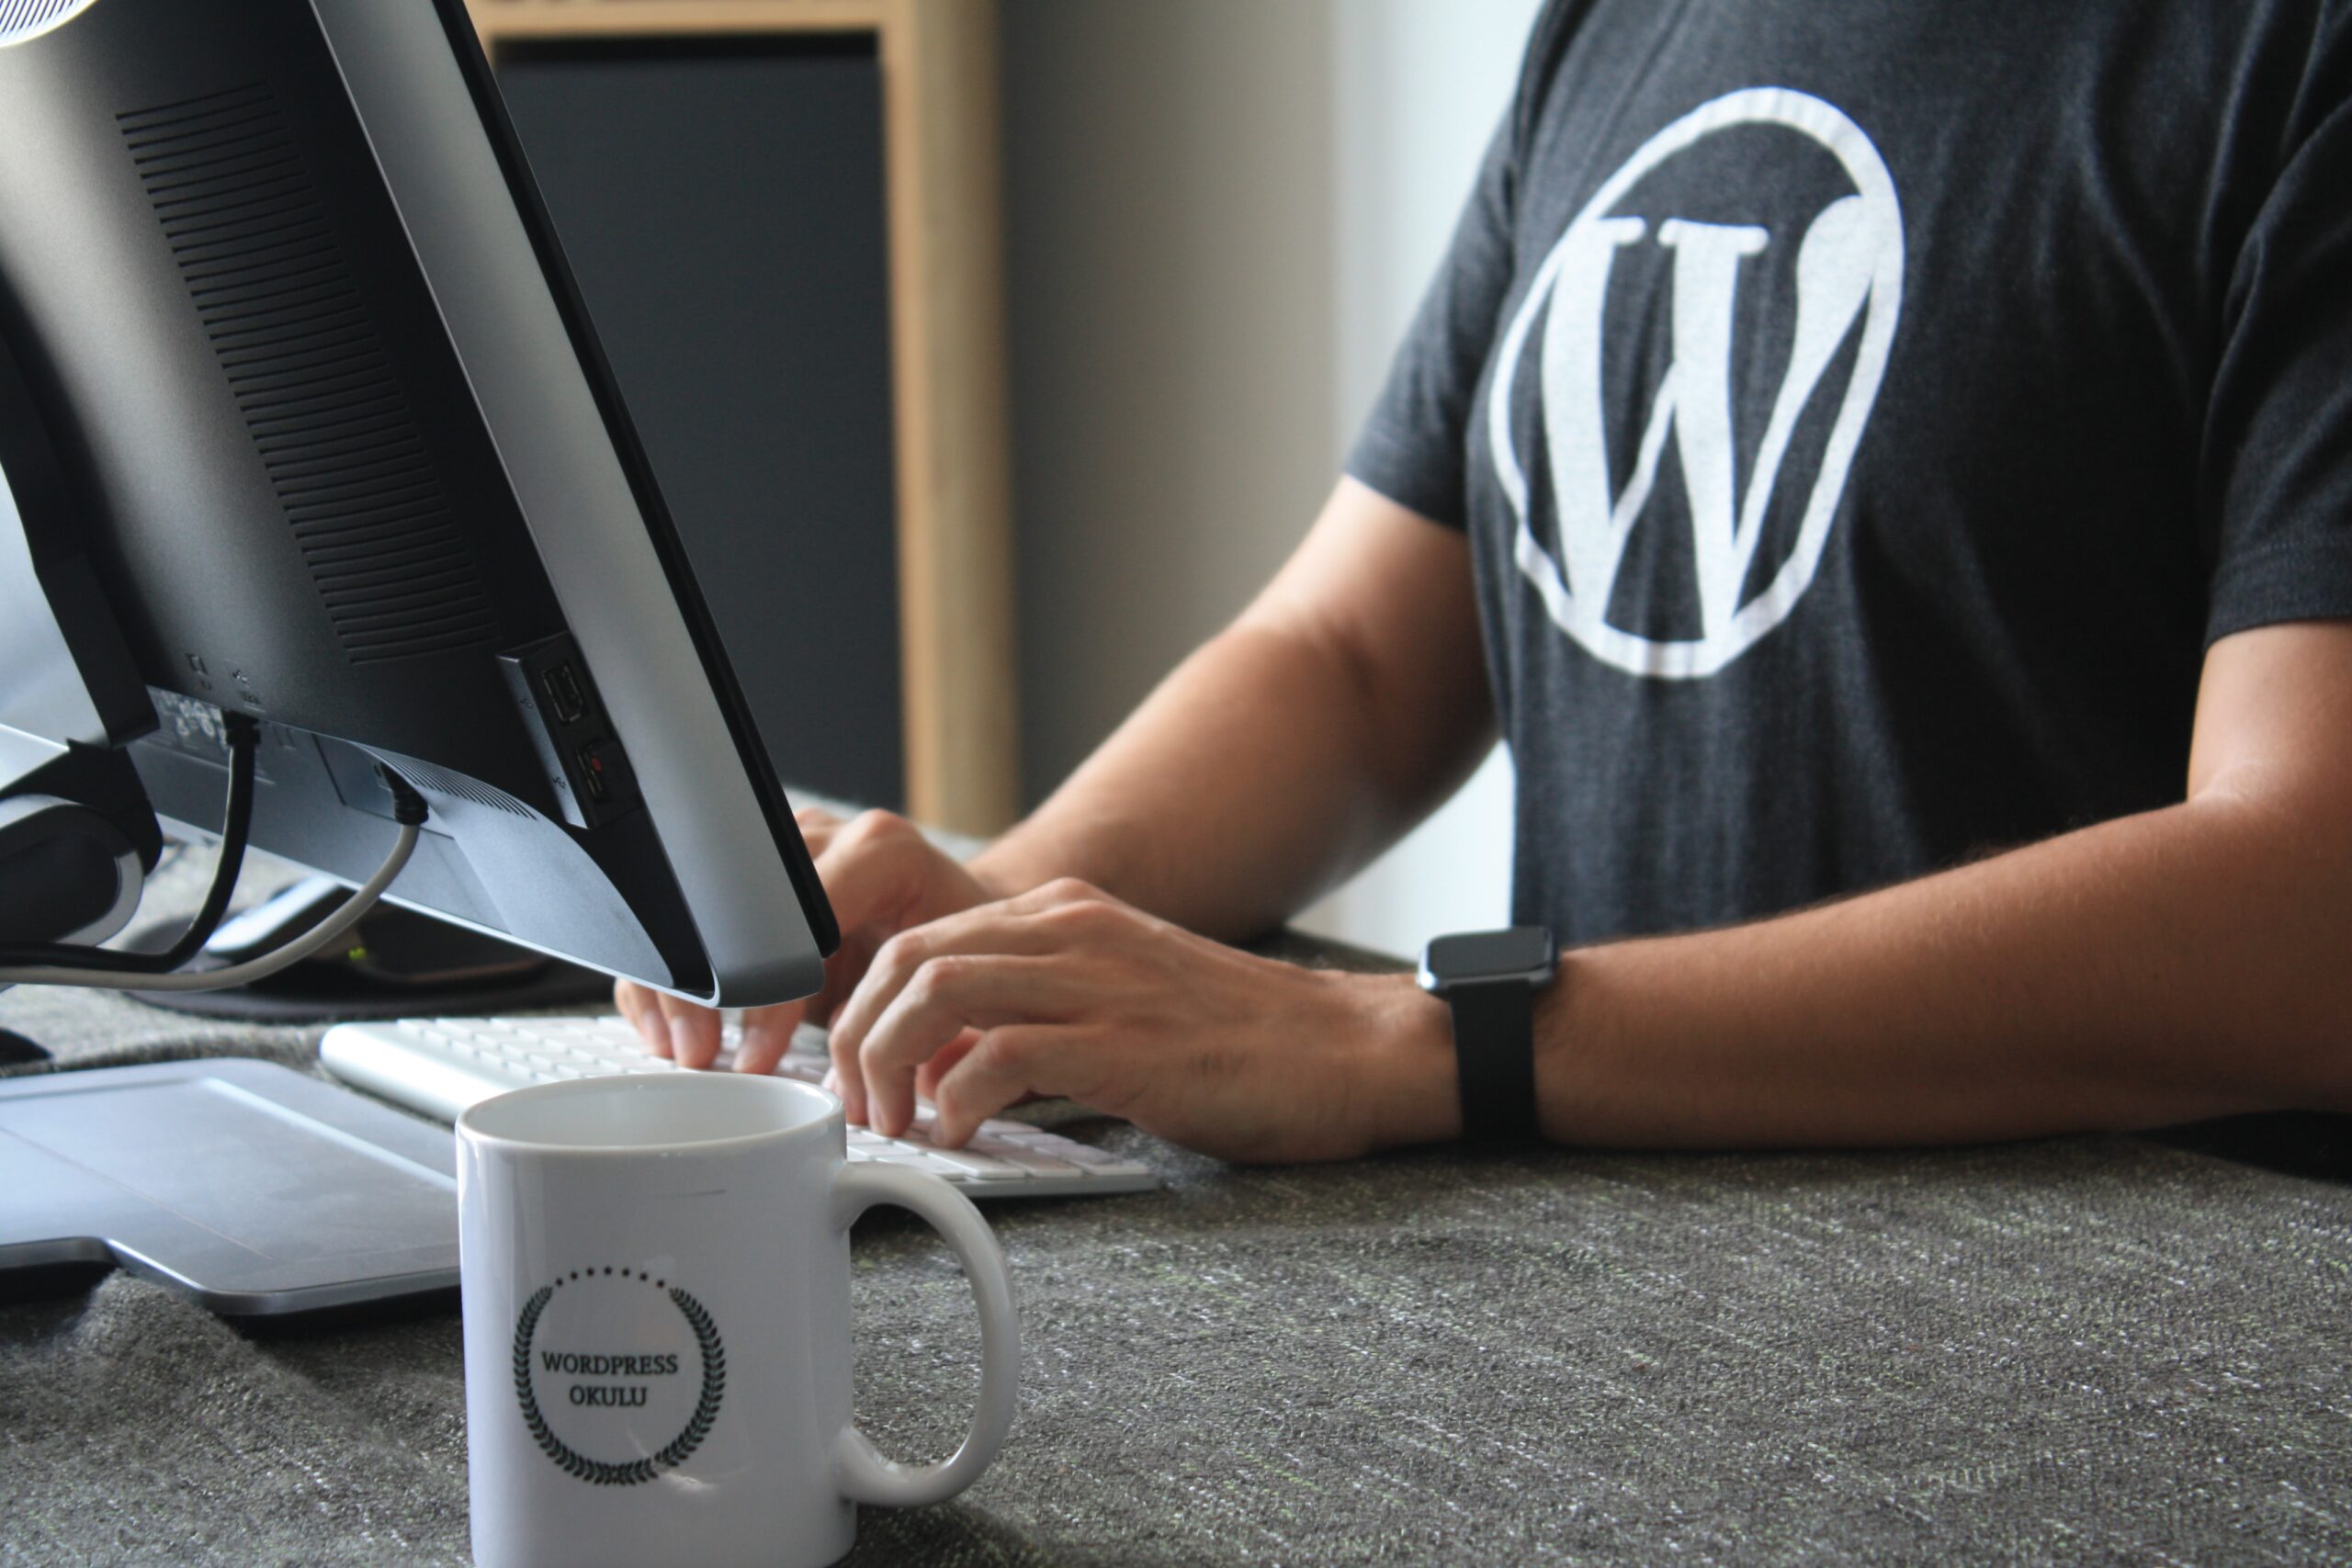 Several Compelling Reasons Why Wordpress It’s the Best Site Builder